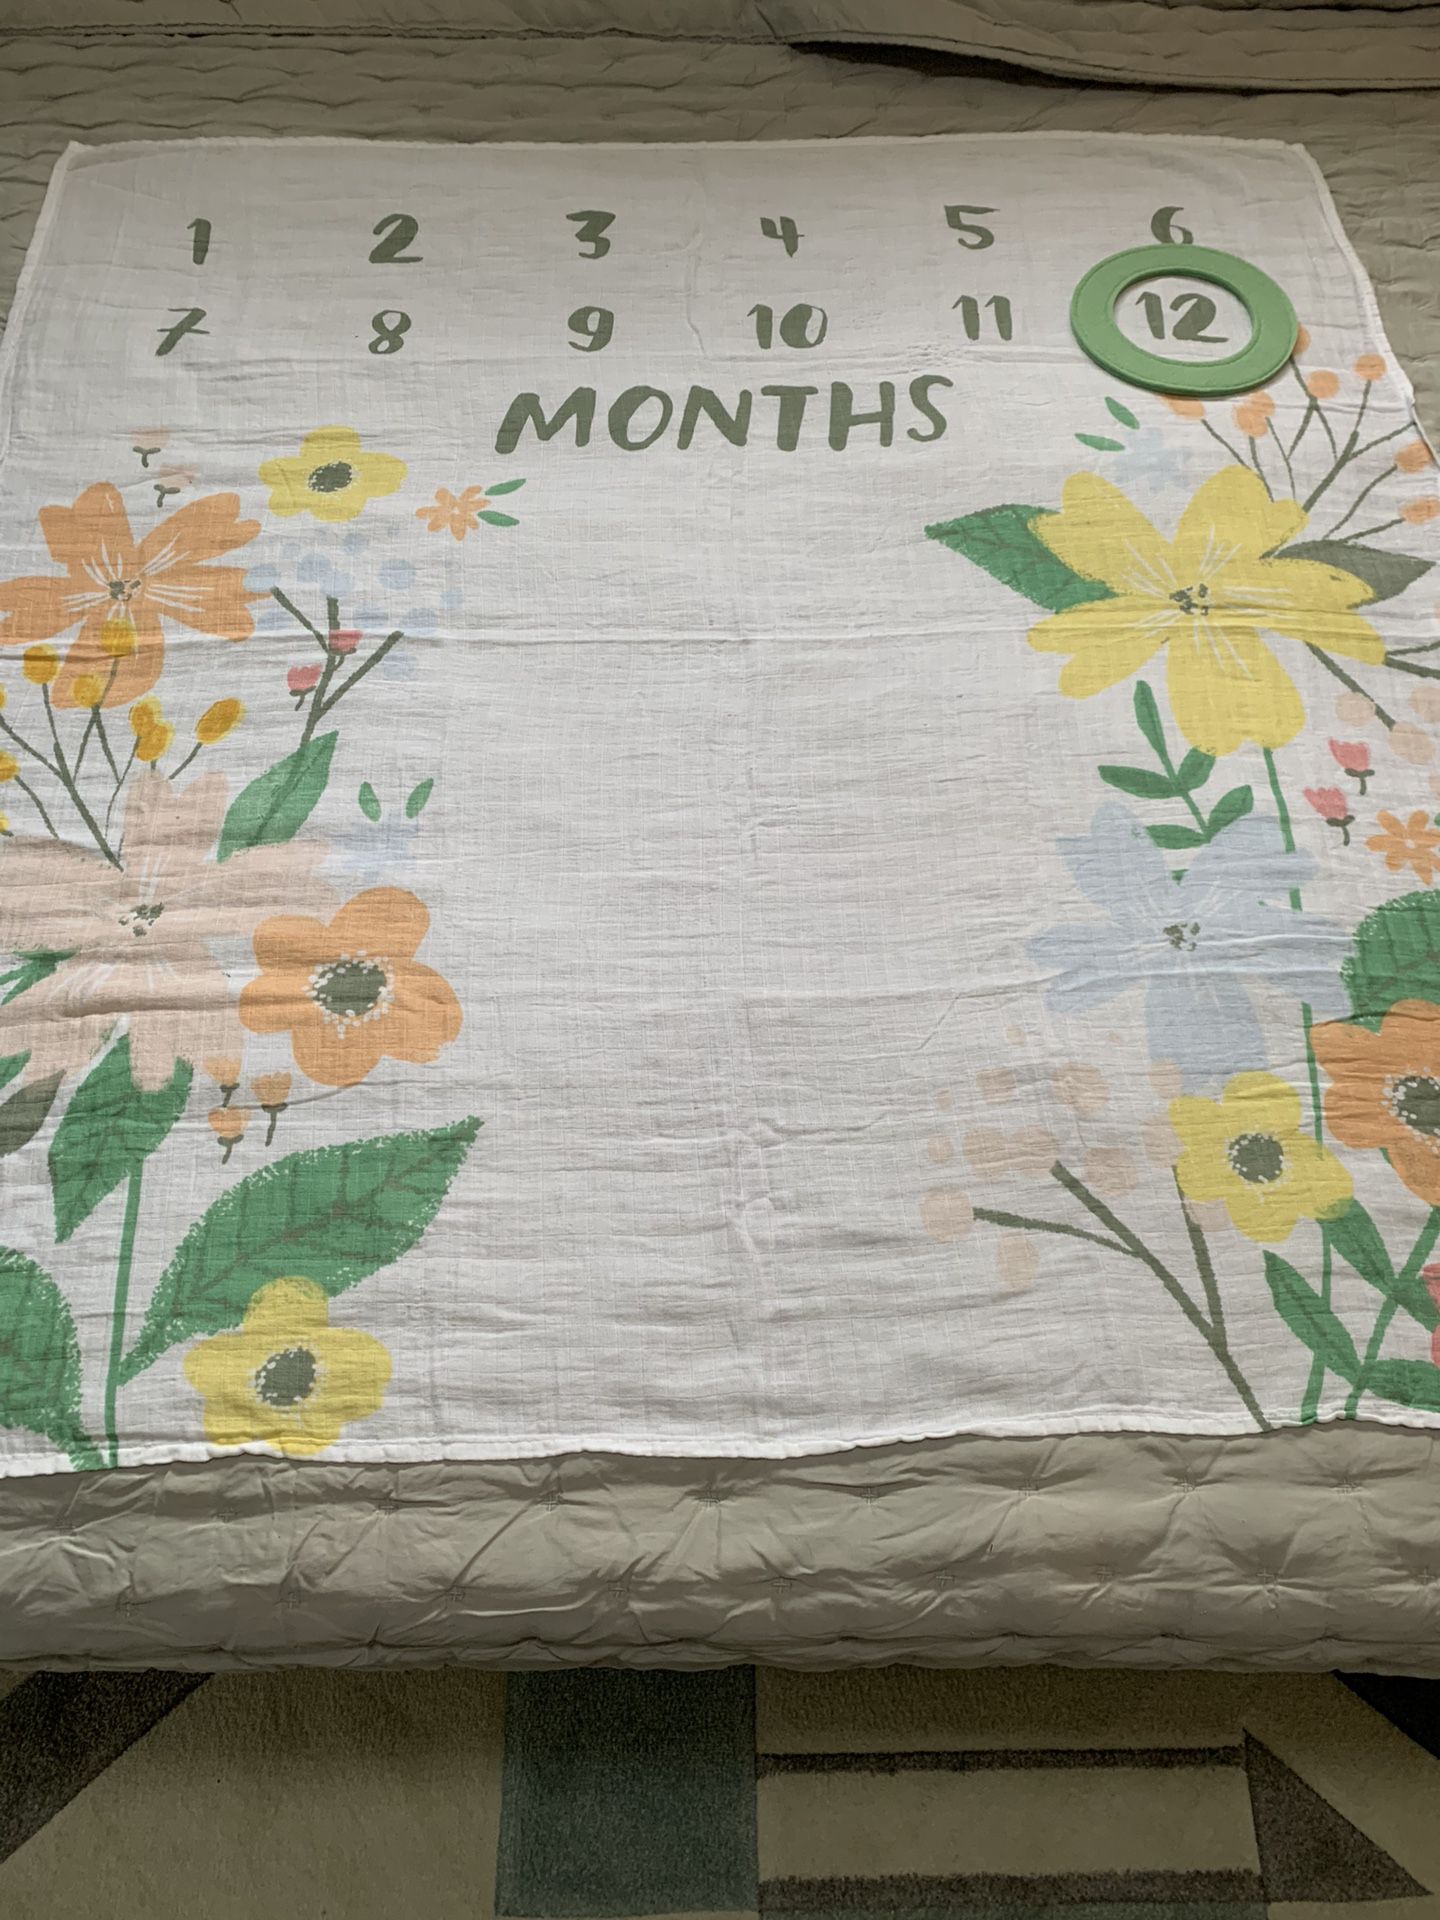 FREE baby Picture Blanket 1-12 Months 